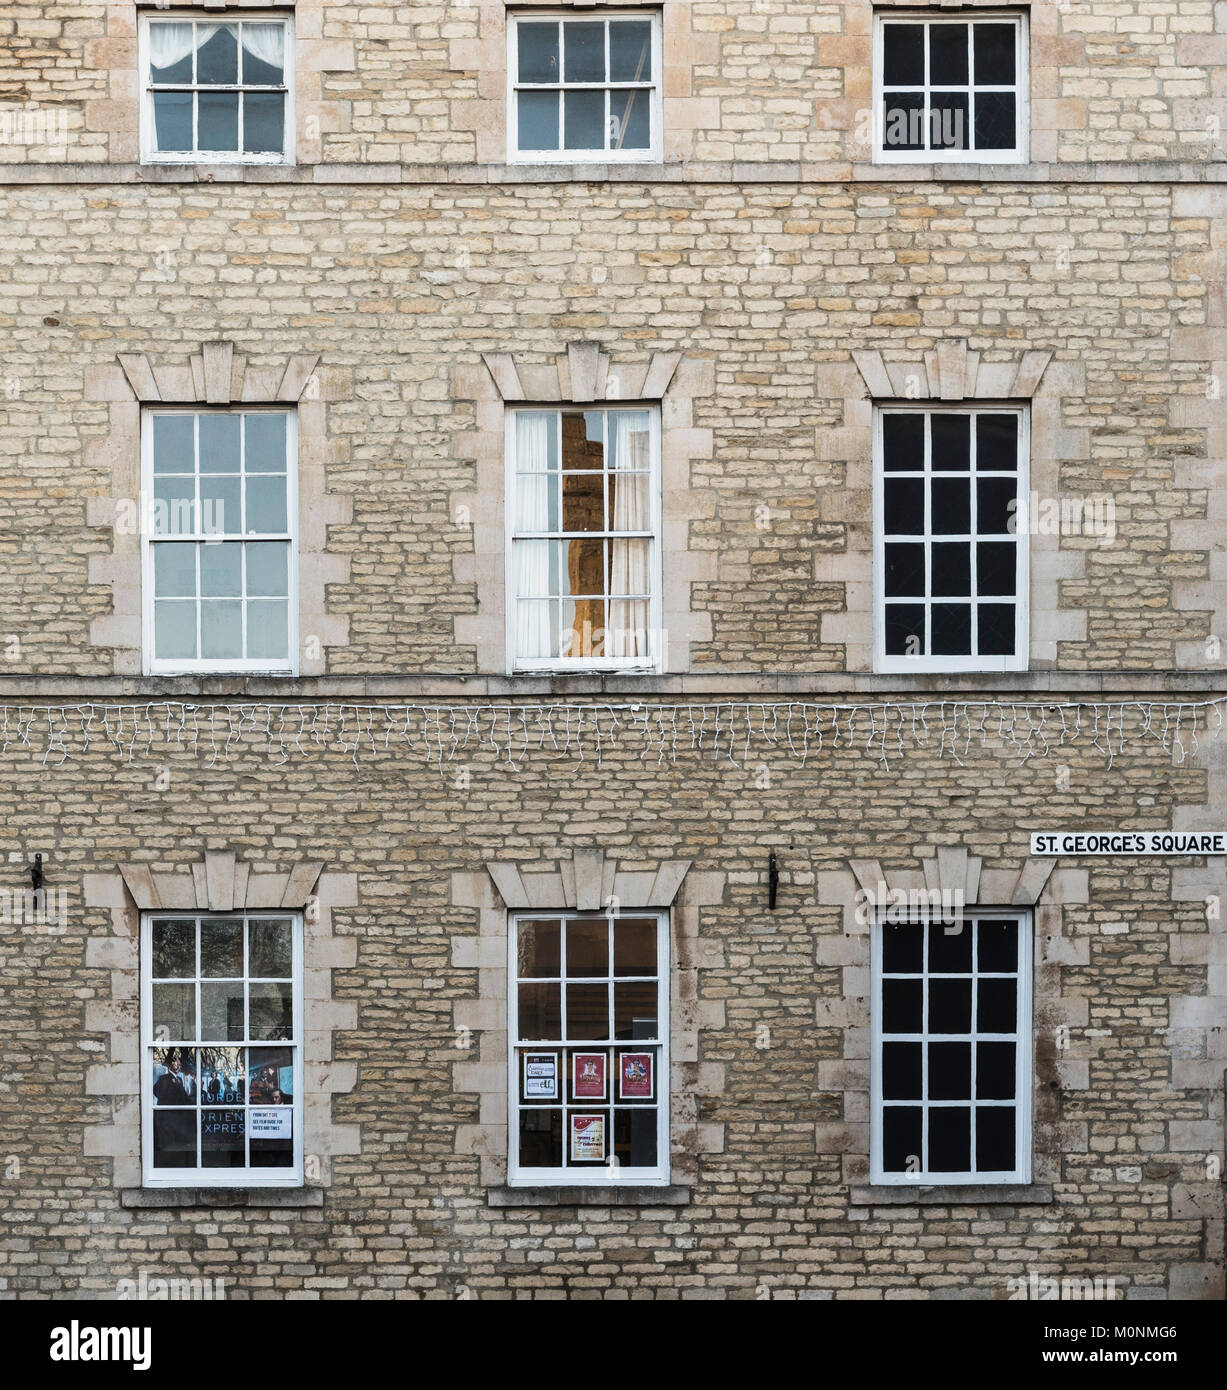 The Stamford Arts Centre building, Stamford, Lincolnshire, England Stock Photo